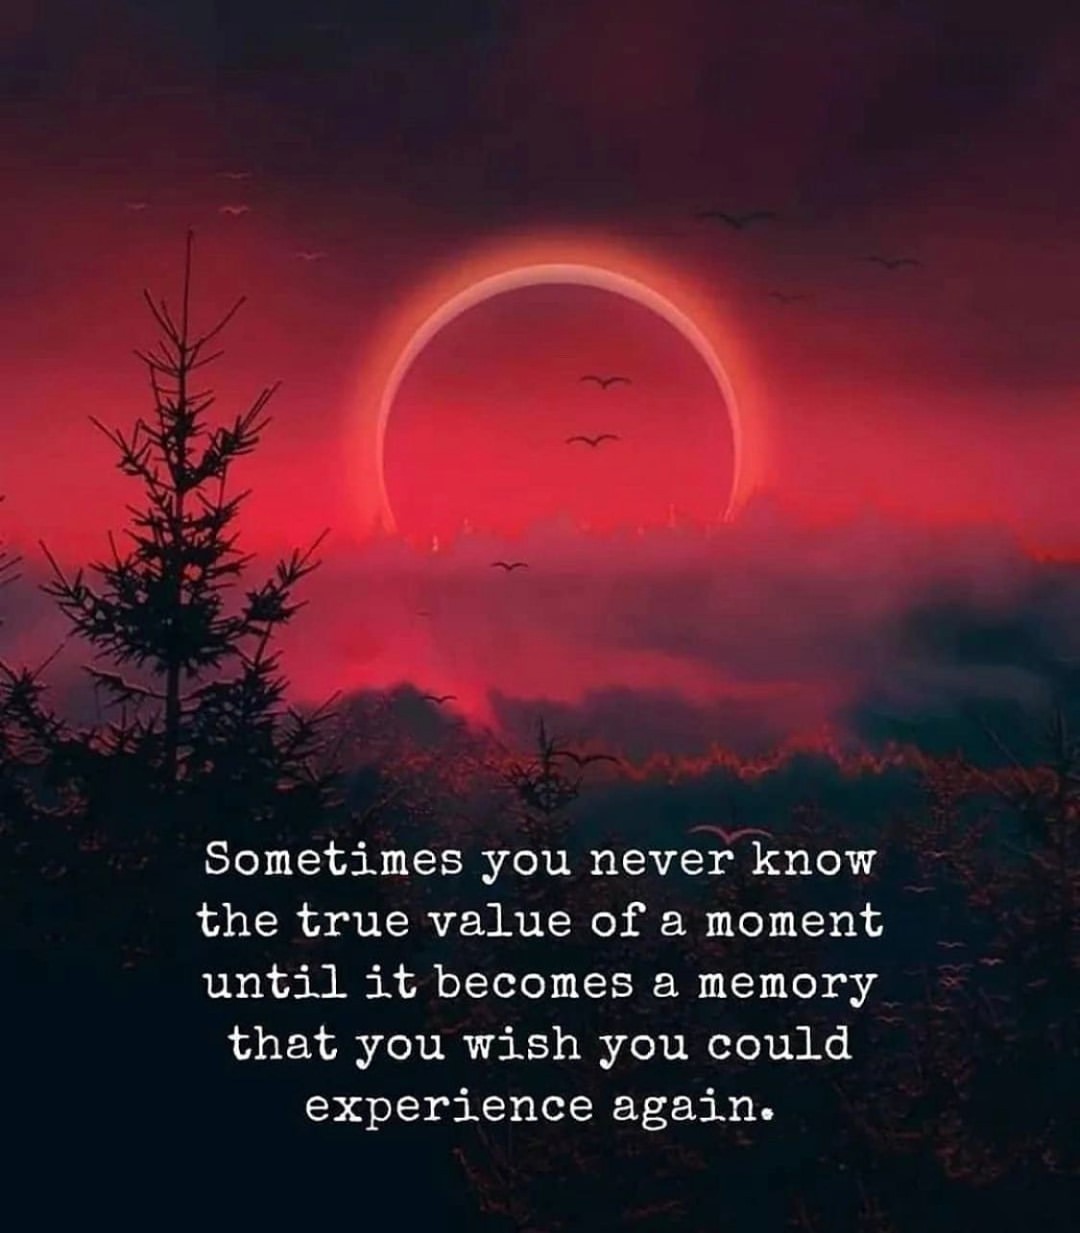 Sometimes you never know the true value of a moment until it becomes a memory that you wish you could experience again.